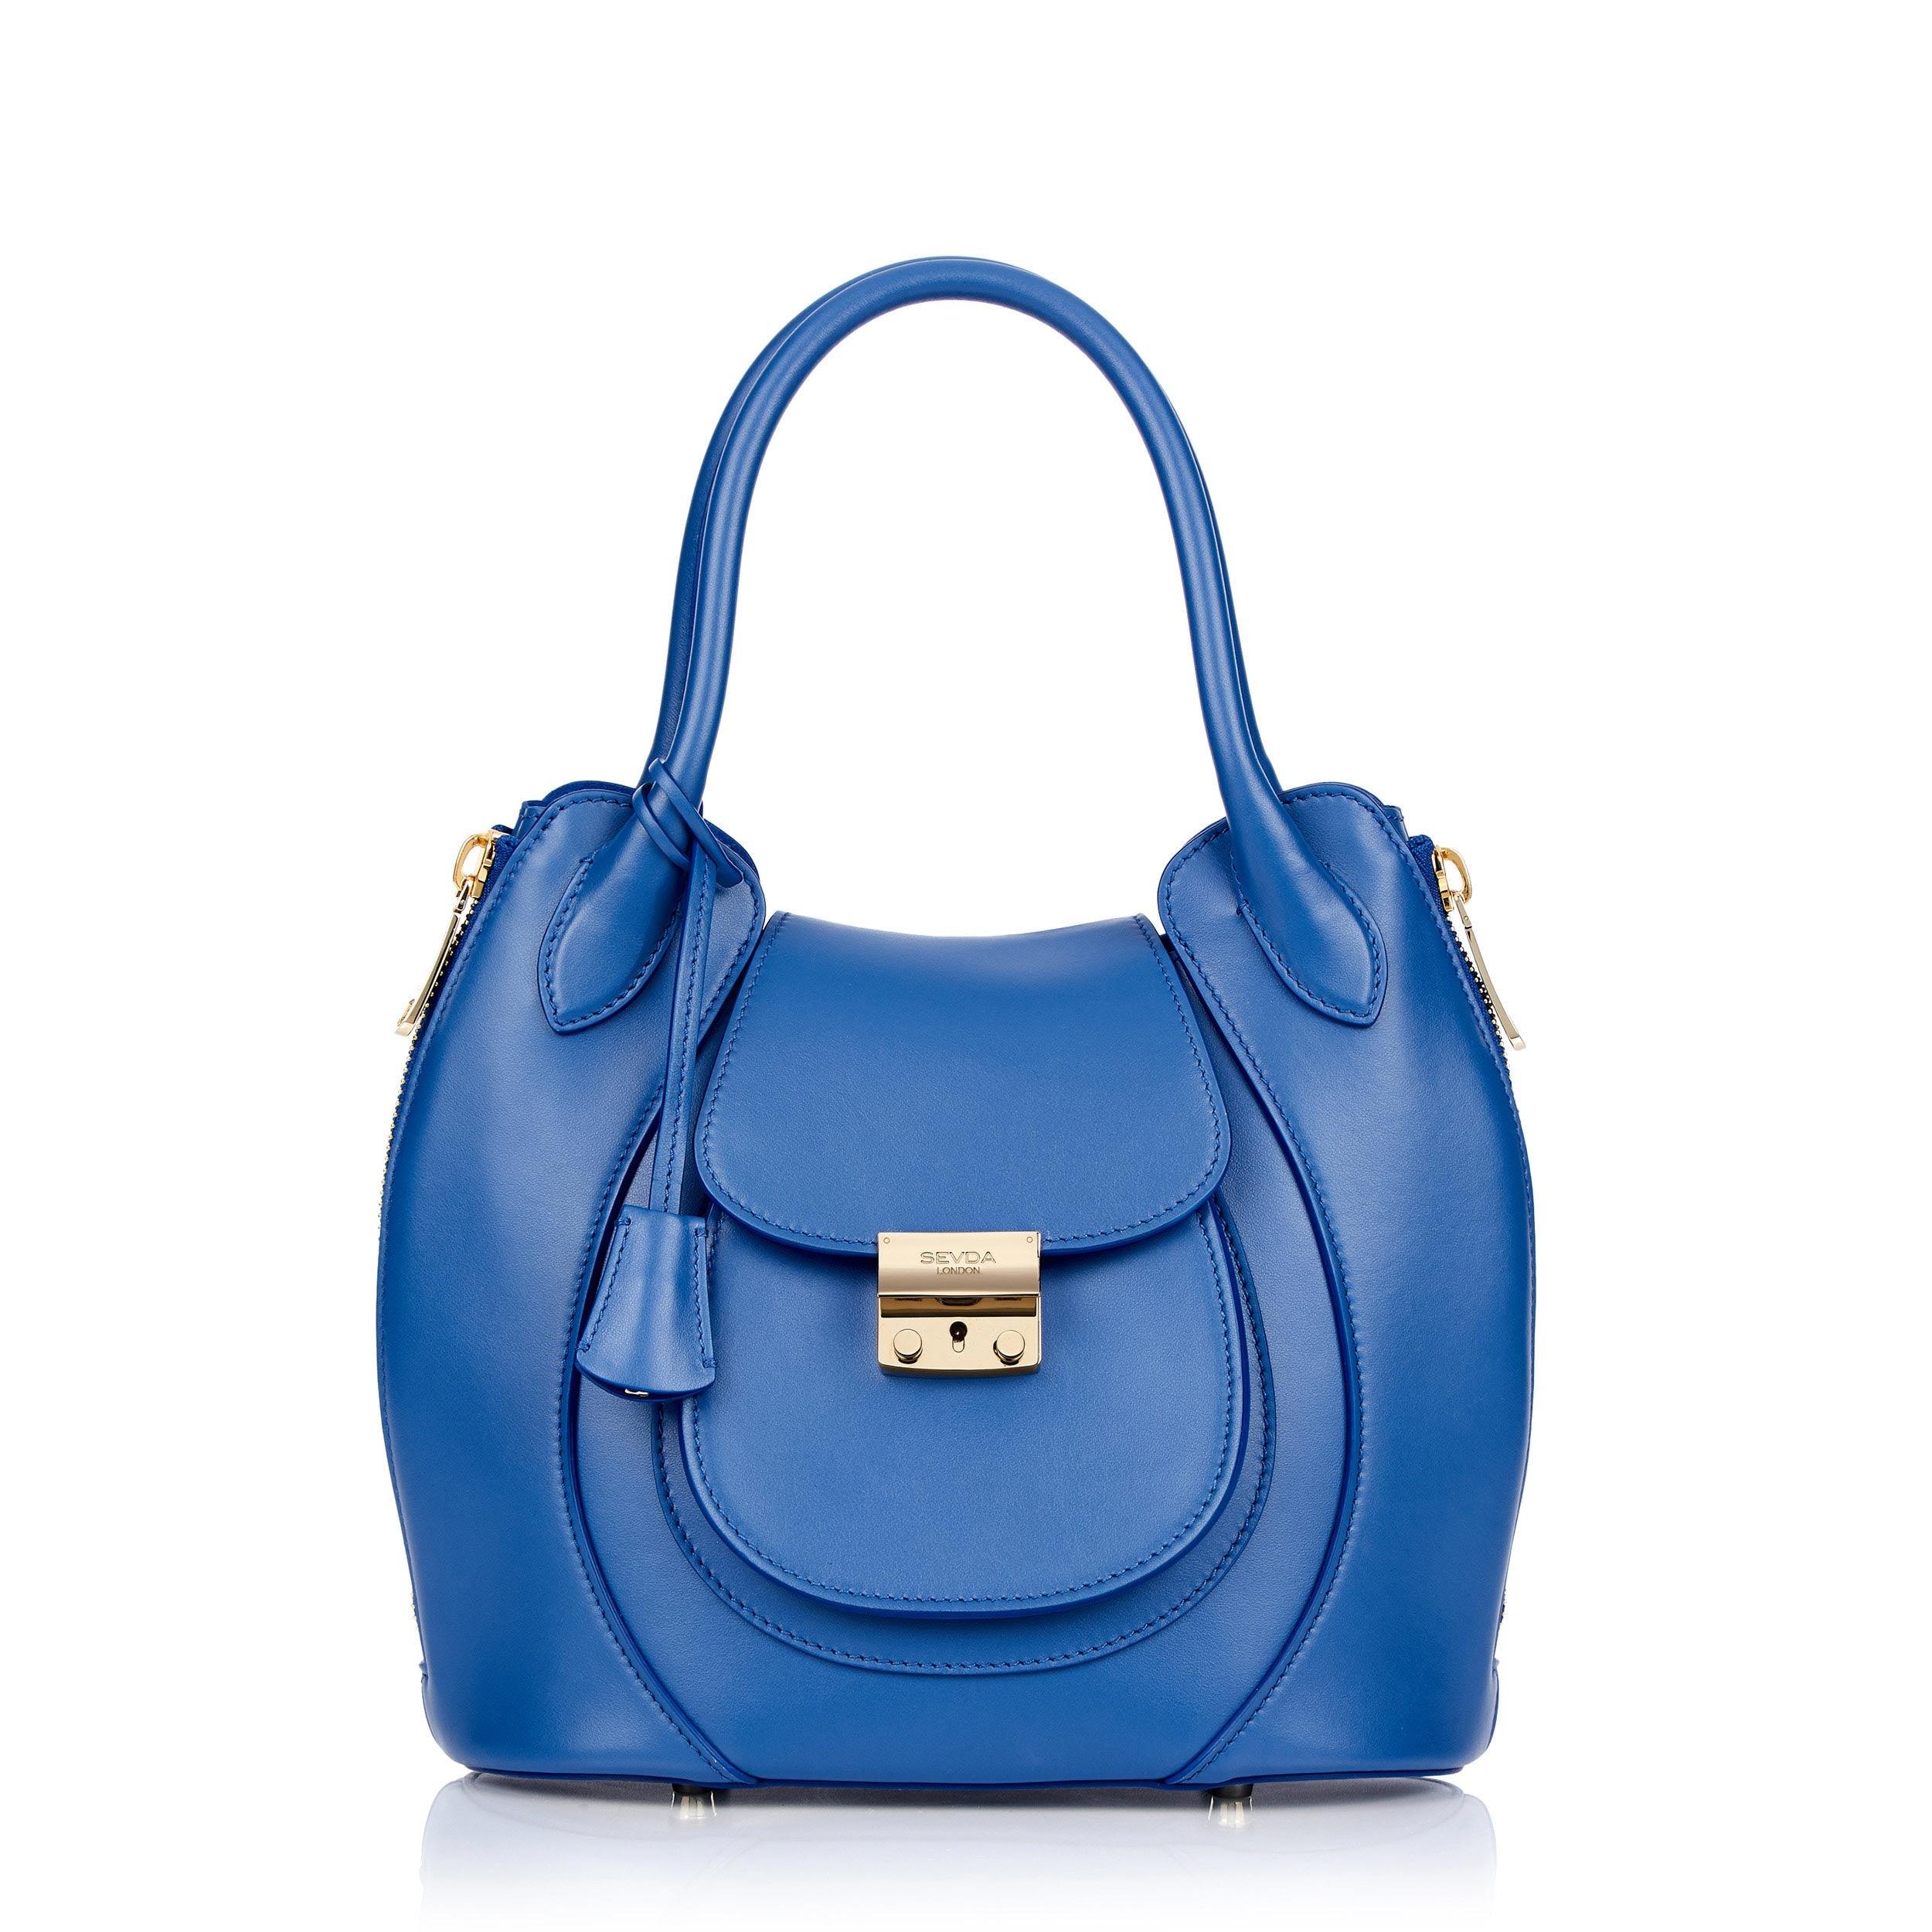 Royal Blue Luxury Designer Bag - Marrying London's fashion with Italian craftsmanship, crafted from deforestation-free leather.